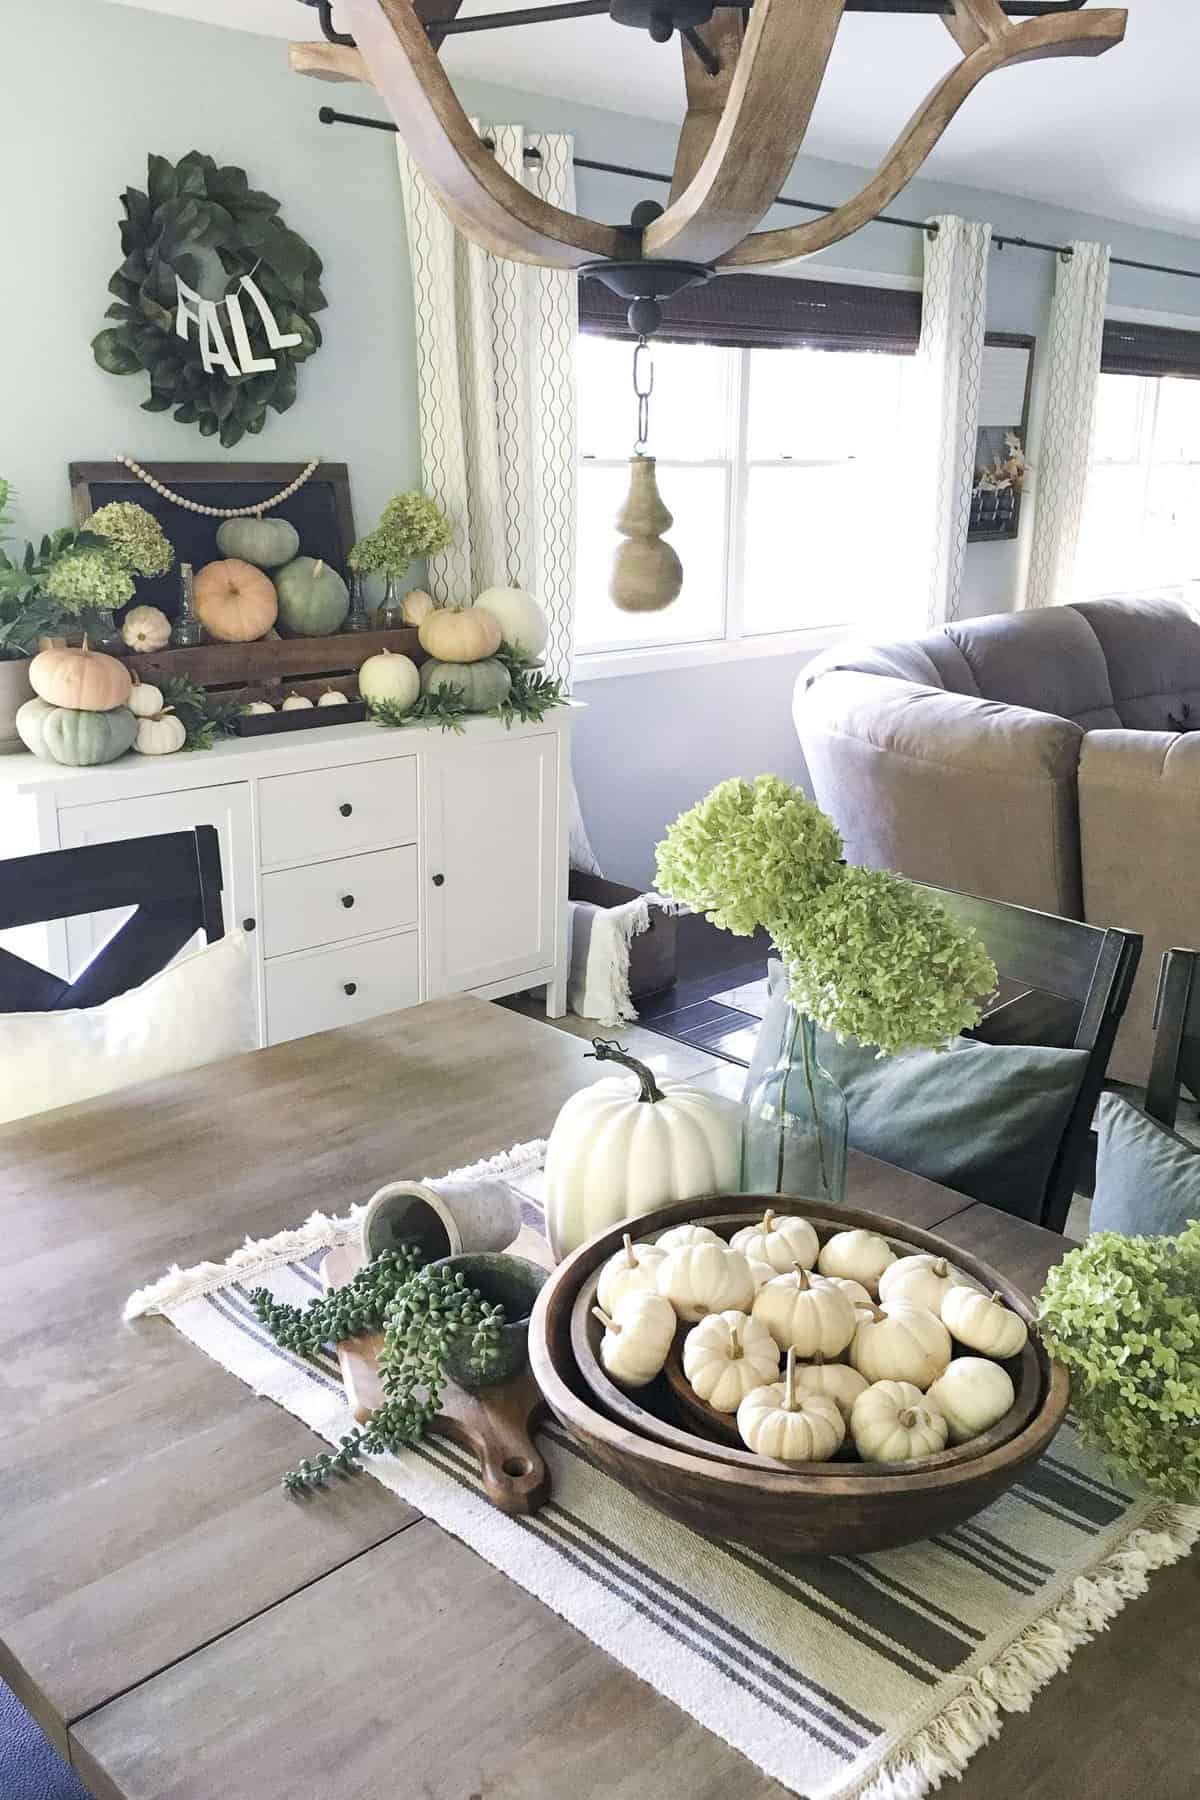 Looking for fall home decor ideas? I'm excited to share a simple fall decor home tour along with 7 other talented home decor bloggers with you today.